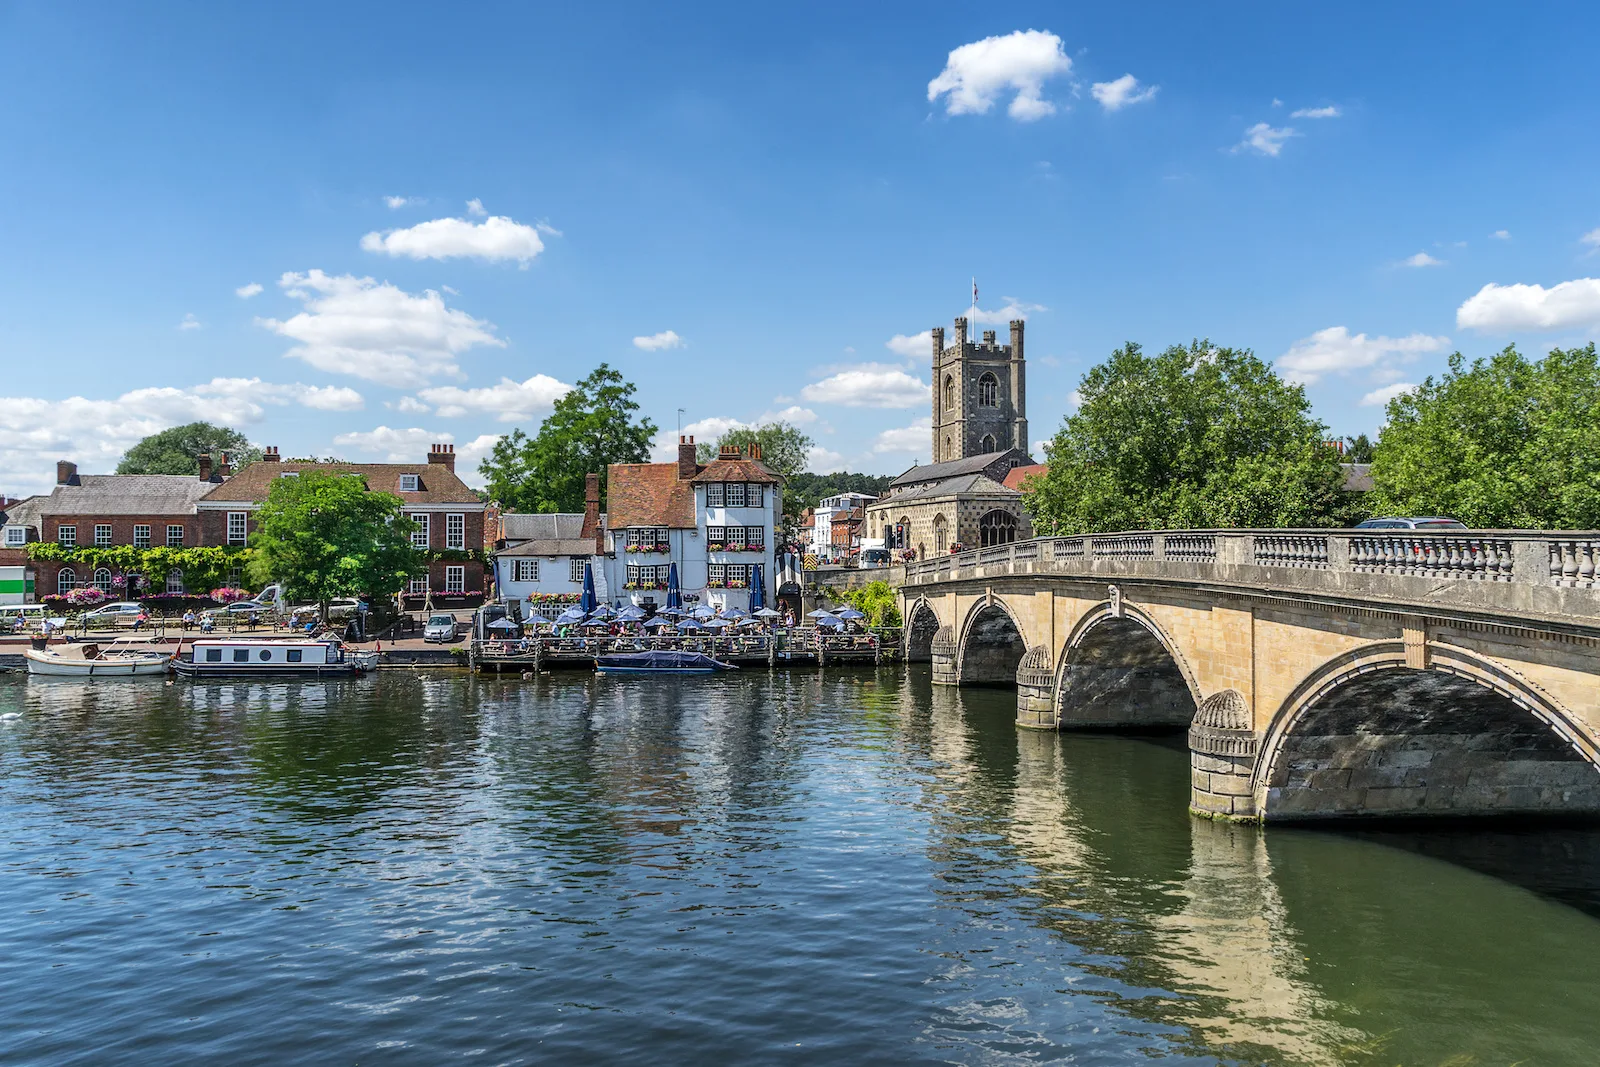 henley-on-thames in oxfordshire, operation of Wilkins home removal services